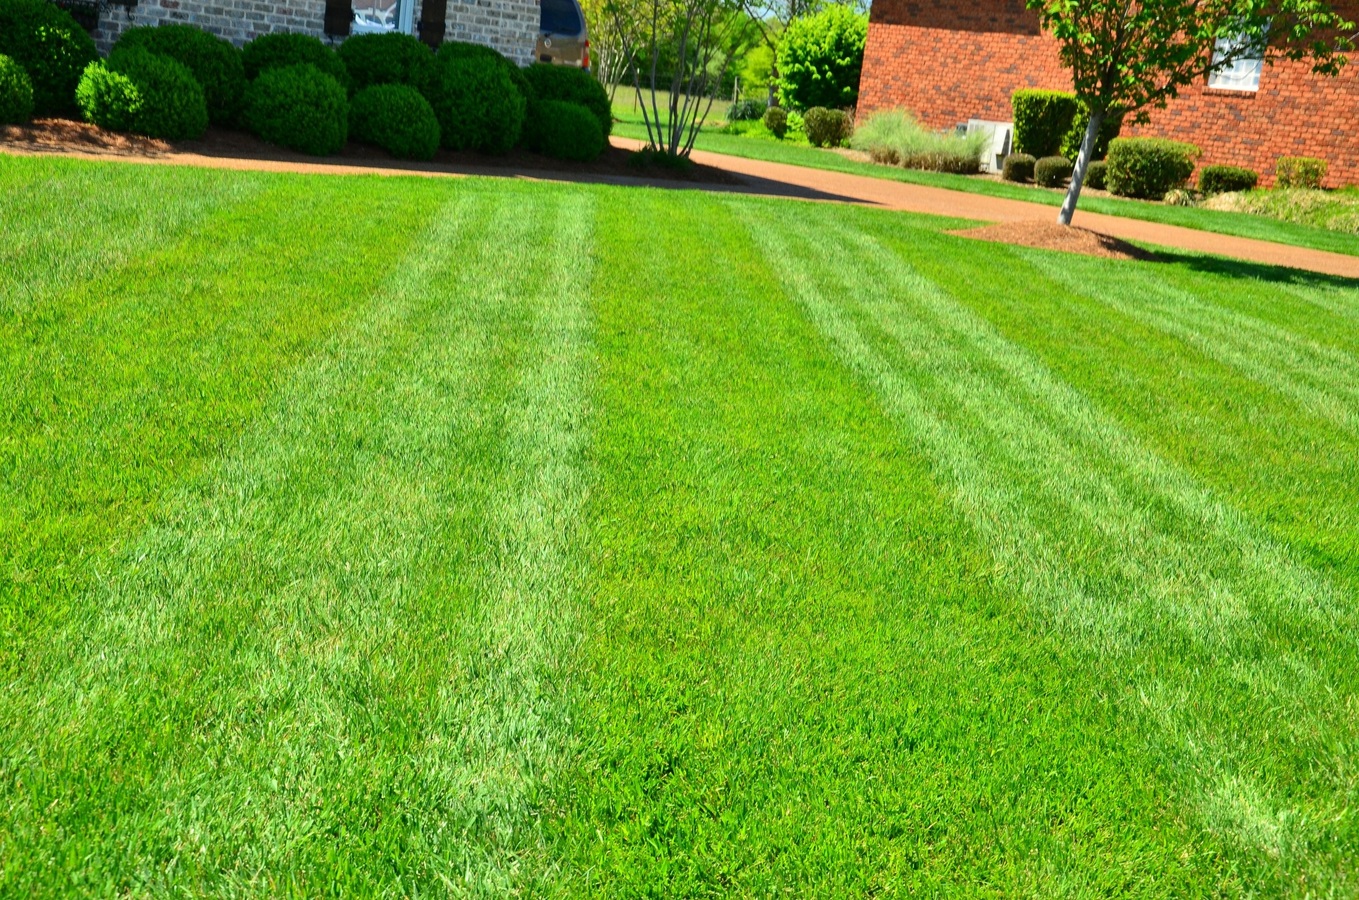 Lawn Fertilization and Weed Control in Illinois